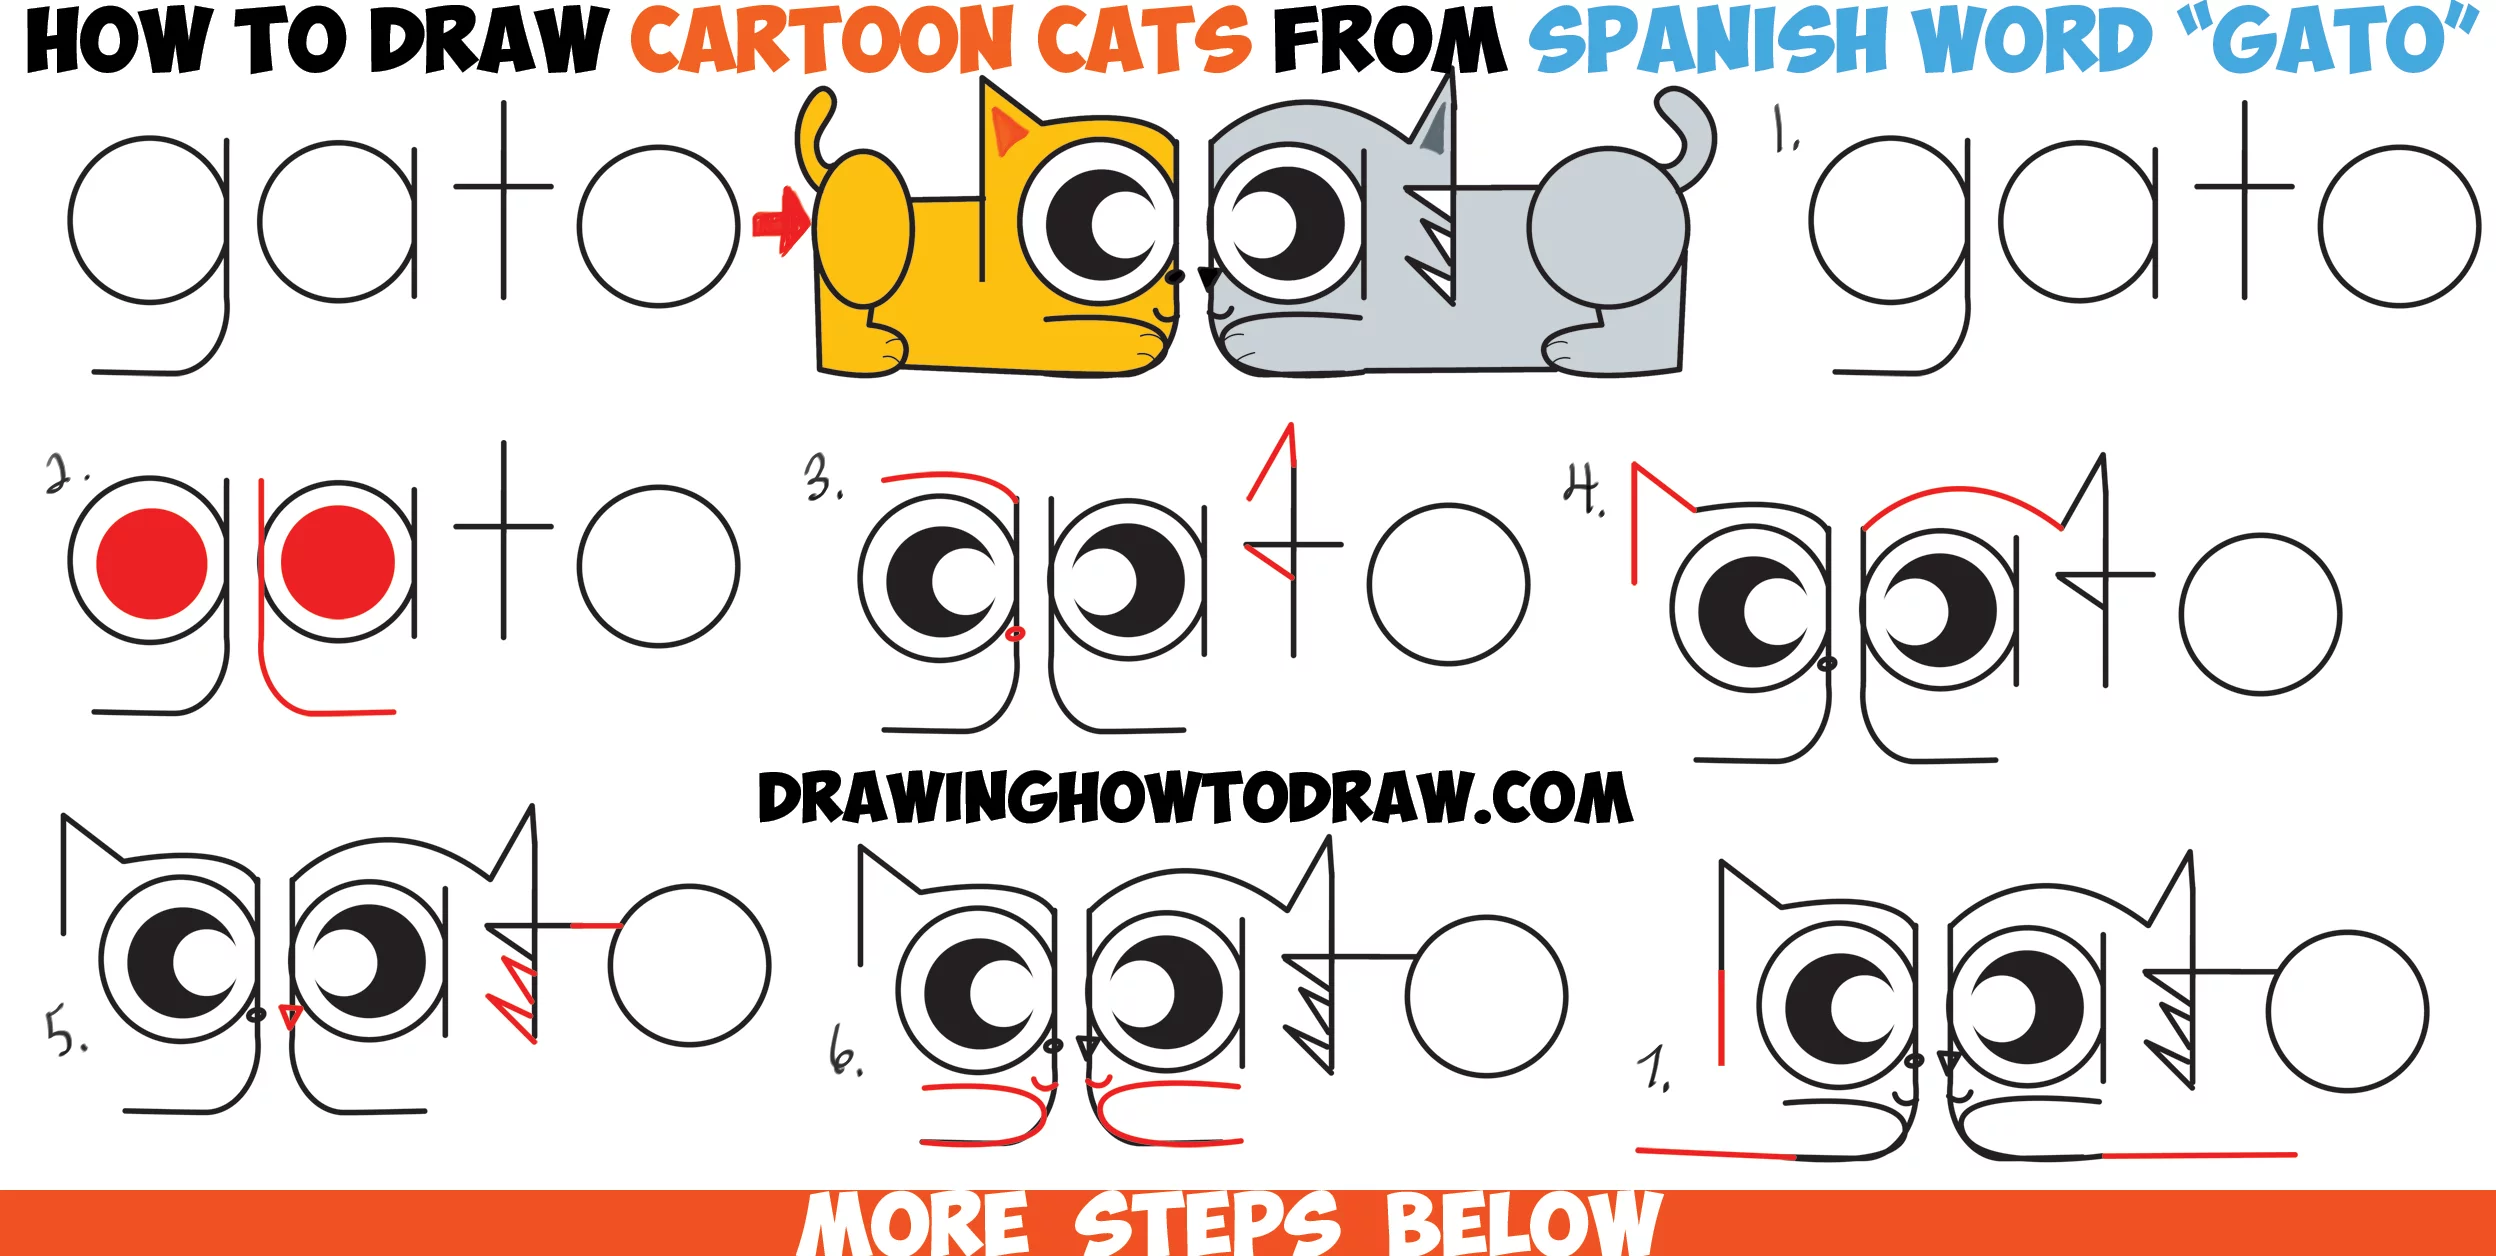 How to Turn Words Cat into a Cartoon - Drawing on Whiteboard Step